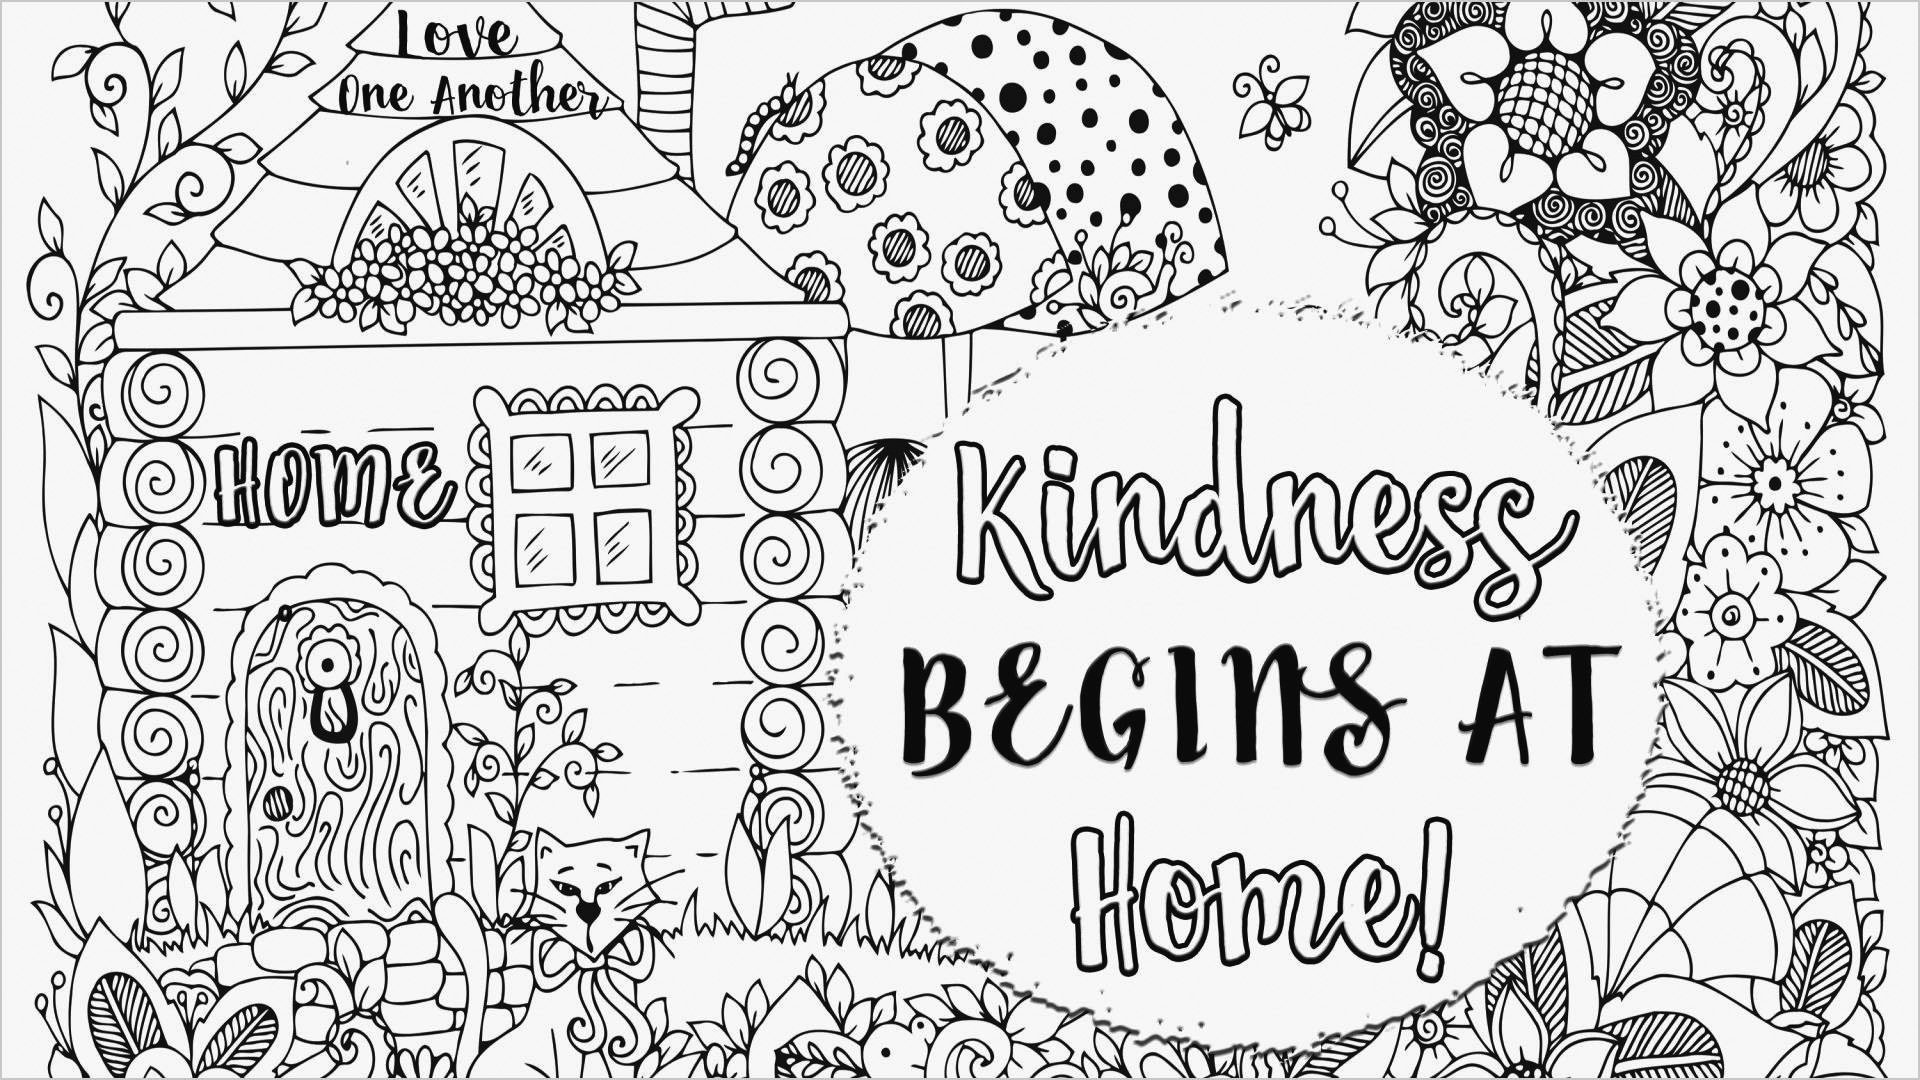 ste-atoinebreant | christmas kindness coloring pages | be kind coloring page colored